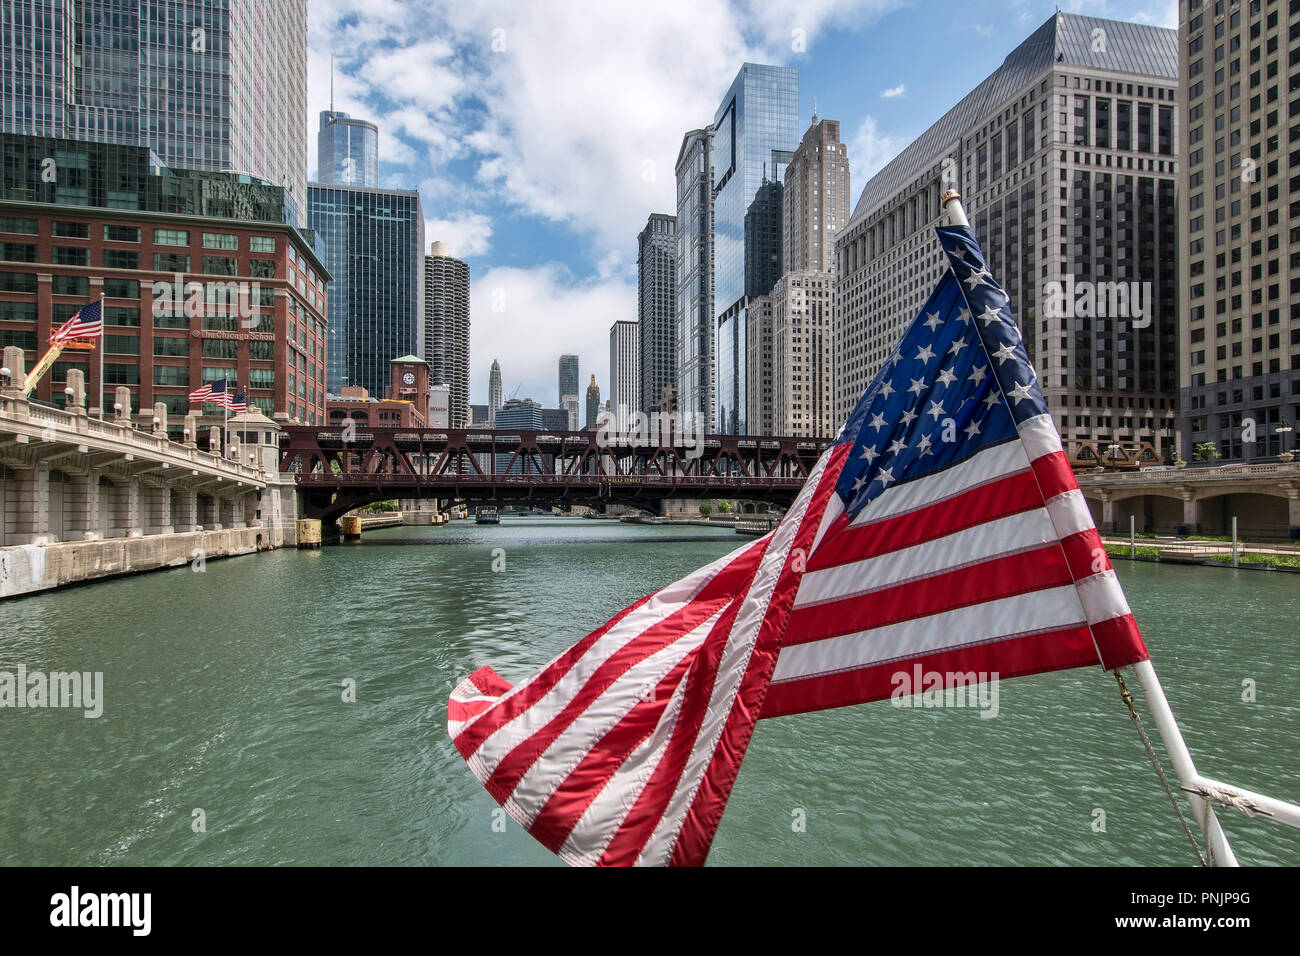 American flag on a boat on the Chicago River, Downtown Chicago, IL. Stock Photo